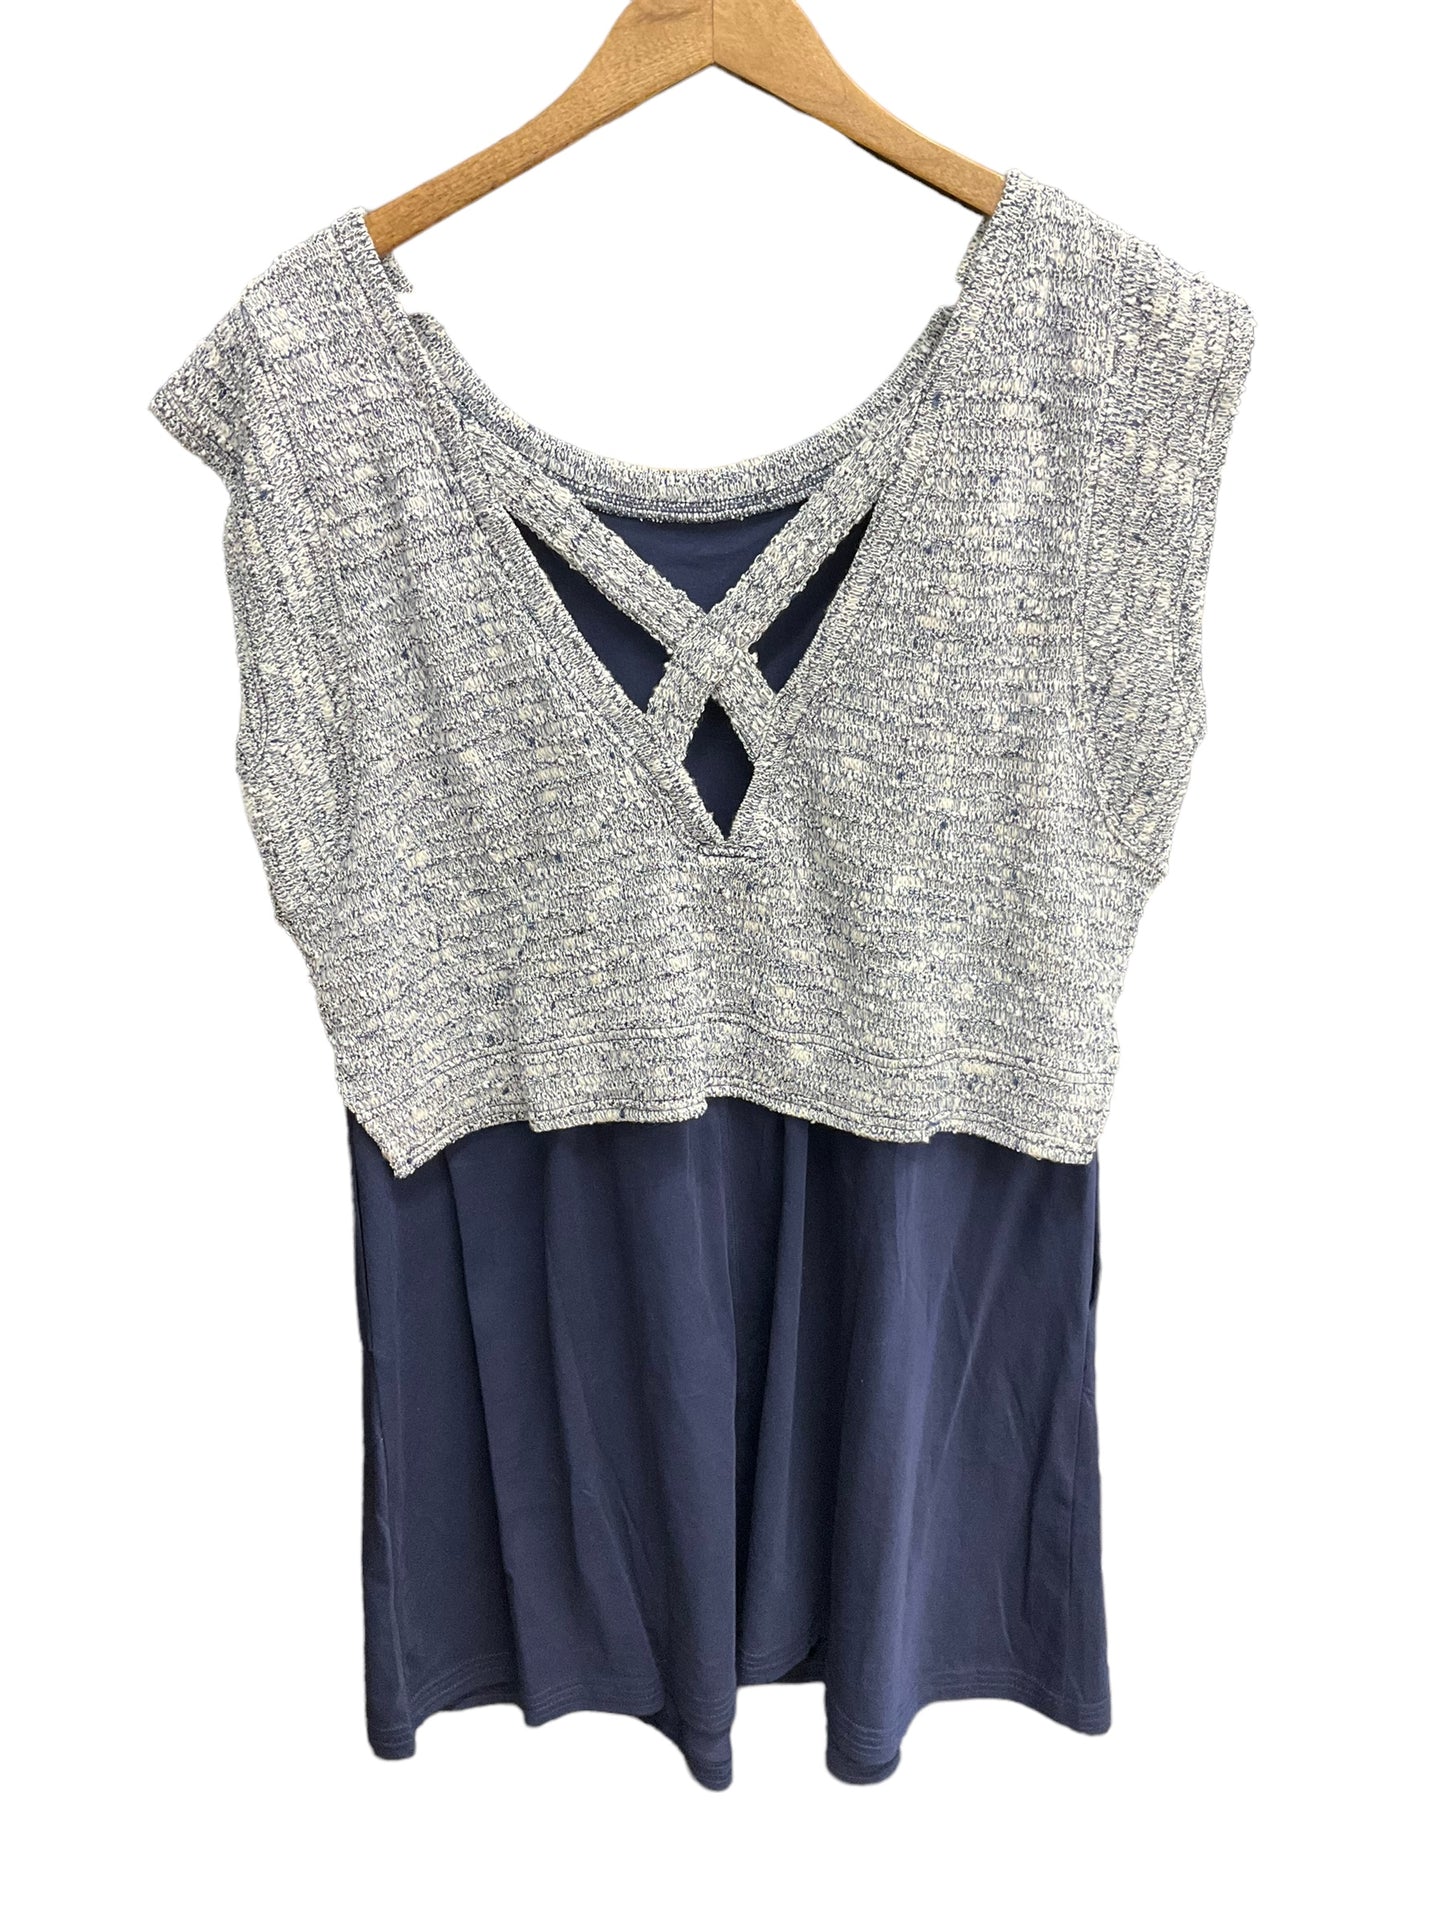 Dress Casual Short By Daily Practice By Anthropologie  Size: M